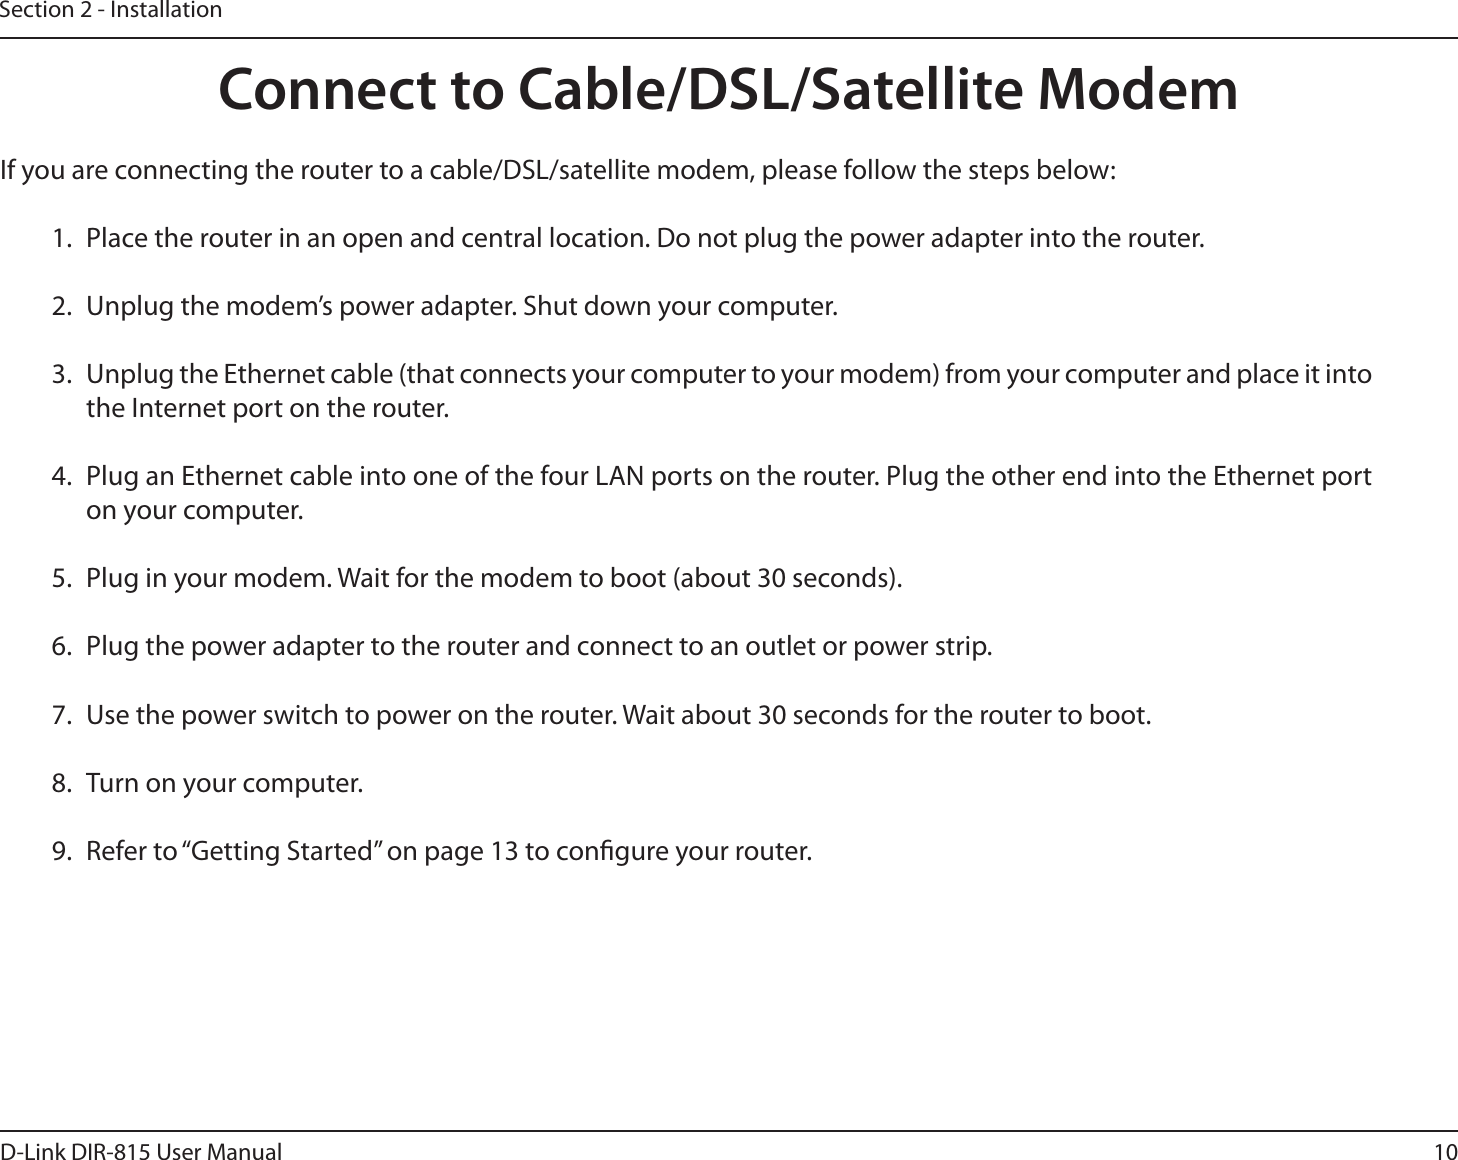 10D-Link DIR-815 User ManualSection 2 - InstallationIf you are connecting the router to a cable/DSL/satellite modem, please follow the steps below:1.  Place the router in an open and central location. Do not plug the power adapter into the router.2.  Unplug the modem’s power adapter. Shut down your computer.3.  Unplug the Ethernet cable (that connects your computer to your modem) from your computer and place it into the Internet port on the router.4.  Plug an Ethernet cable into one of the four LAN ports on the router. Plug the other end into the Ethernet port on your computer.5.  Plug in your modem. Wait for the modem to boot (about 30 seconds).6.  Plug the power adapter to the router and connect to an outlet or power strip. 7.  Use the power switch to power on the router. Wait about 30 seconds for the router to boot.8.  Turn on your computer.9.  Refer to “Getting Started” on page 13 to congure your router.Connect to Cable/DSL/Satellite Modem